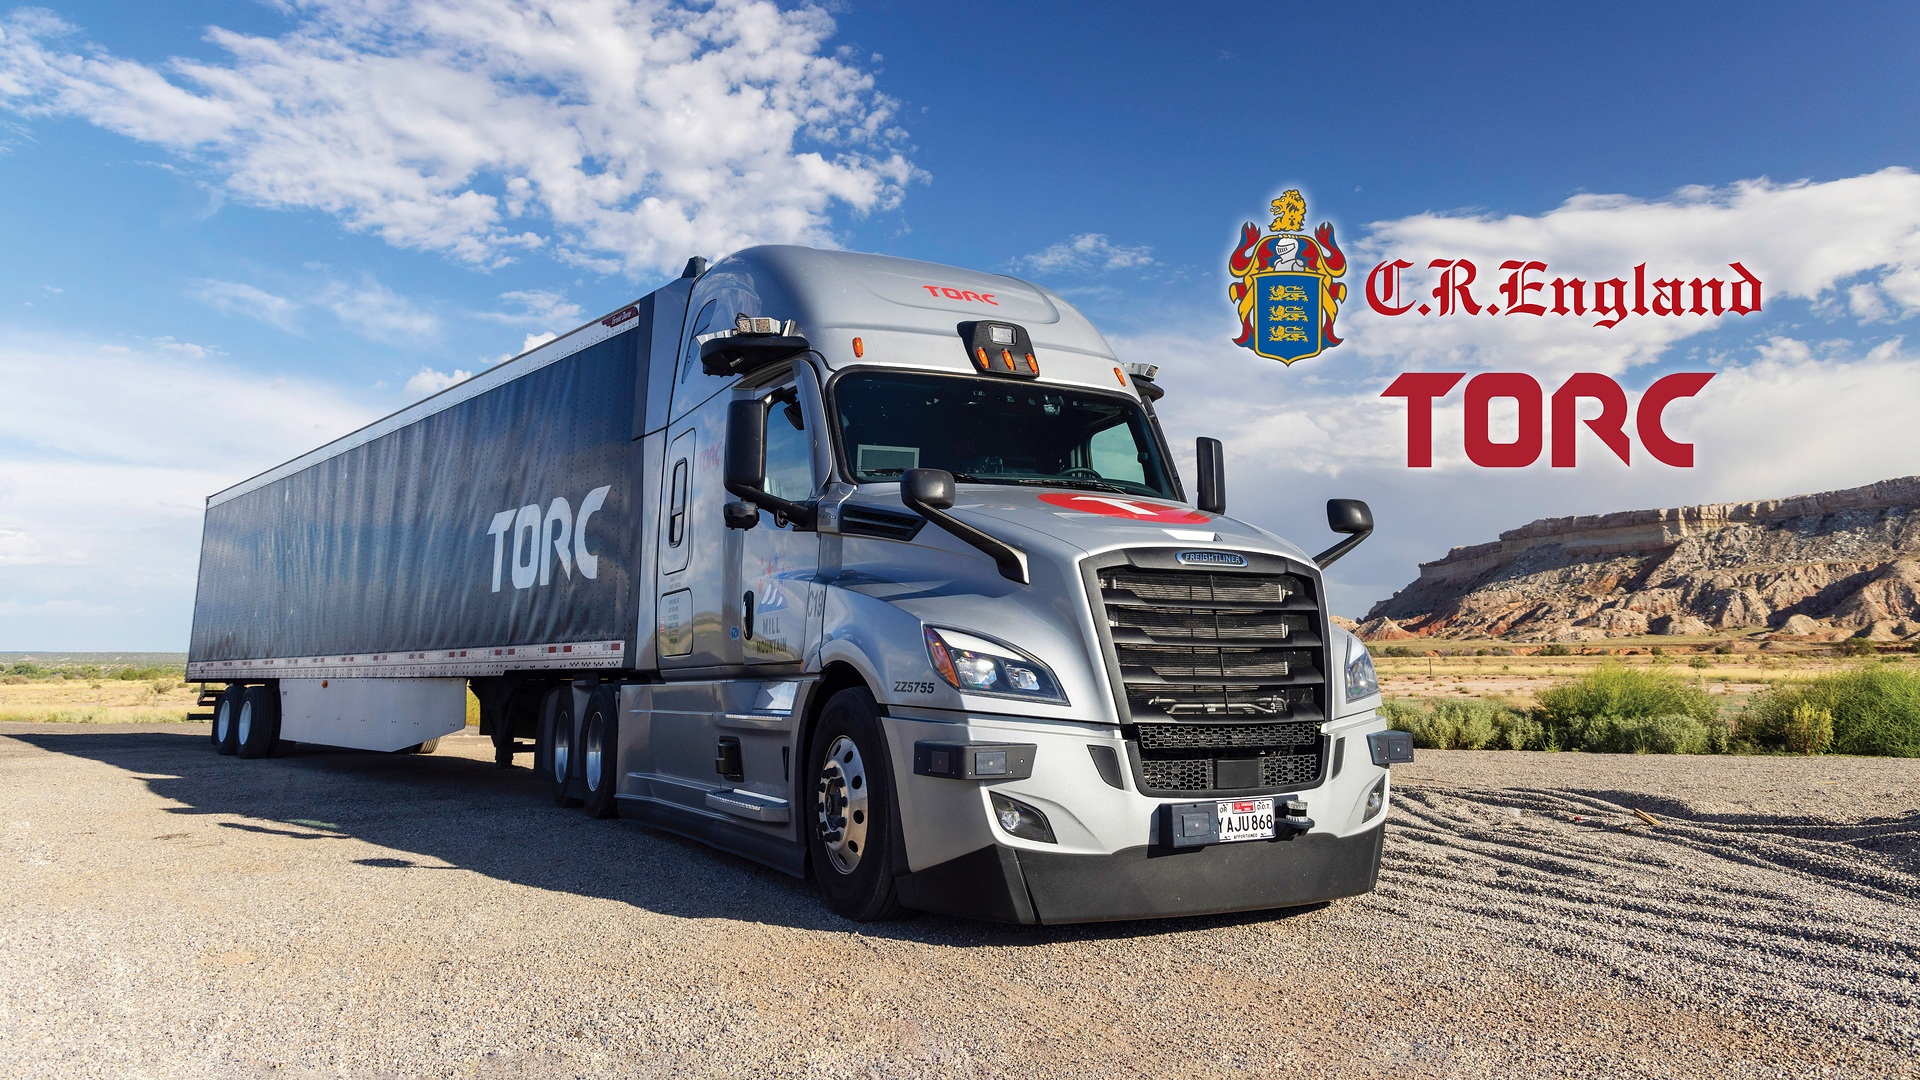 C.R. England and Daimler Truck subsidiary Torc announce autonomous trucking pilot in the United States